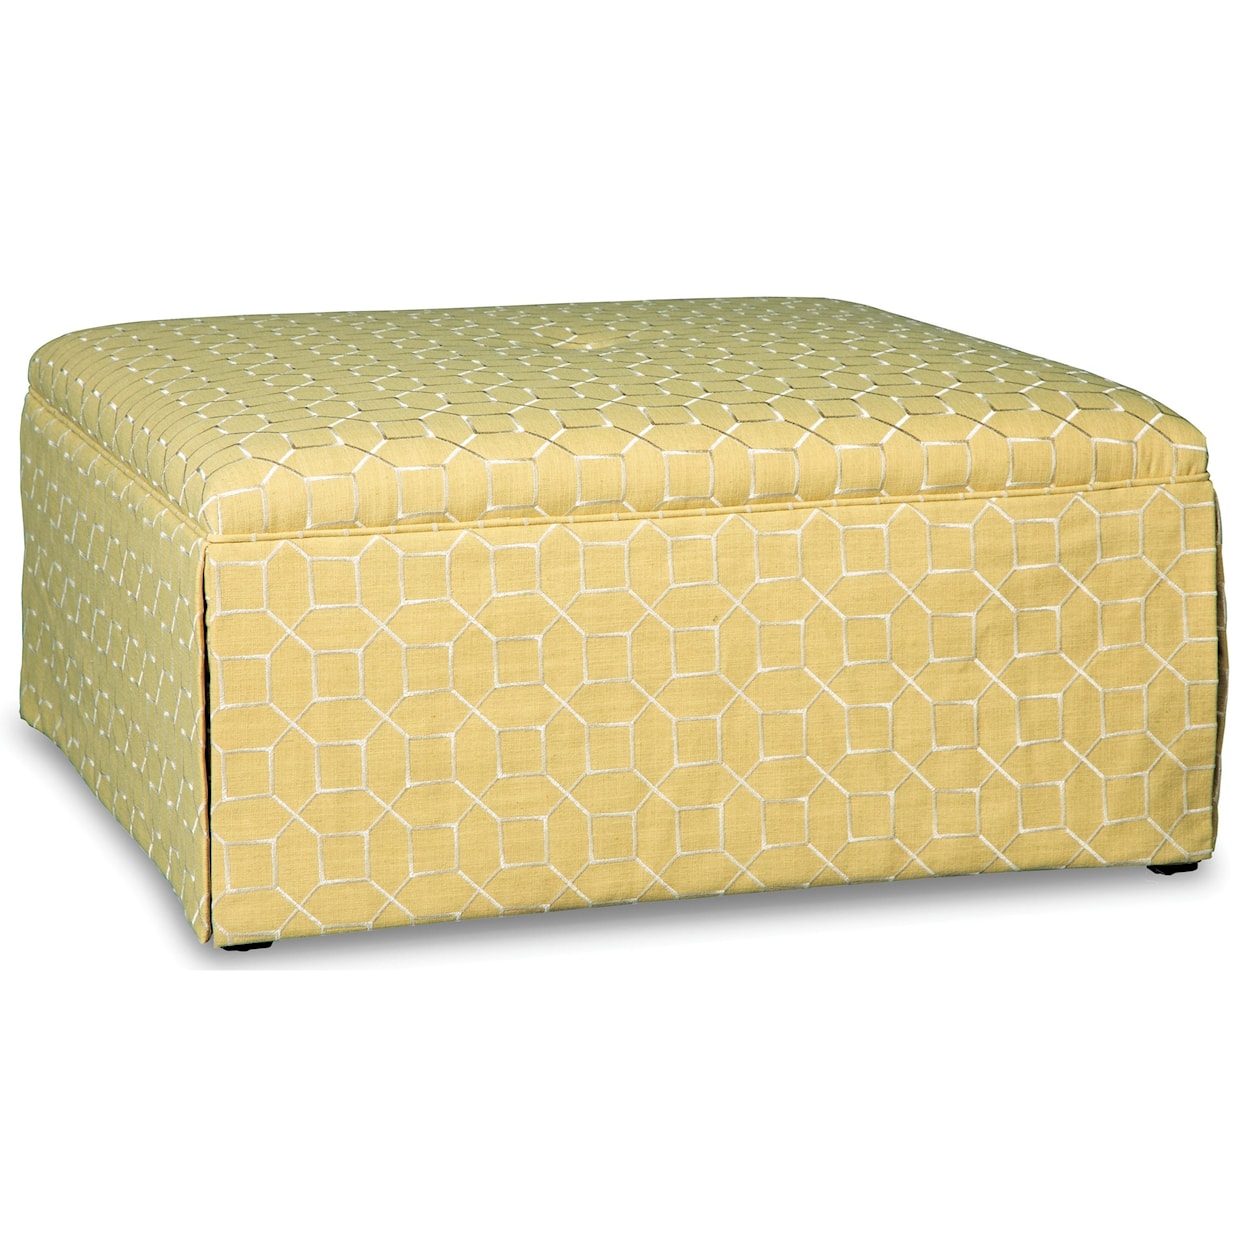 Paula Deen by Craftmaster Upholstered Chairs Square Cocktail Ottoman